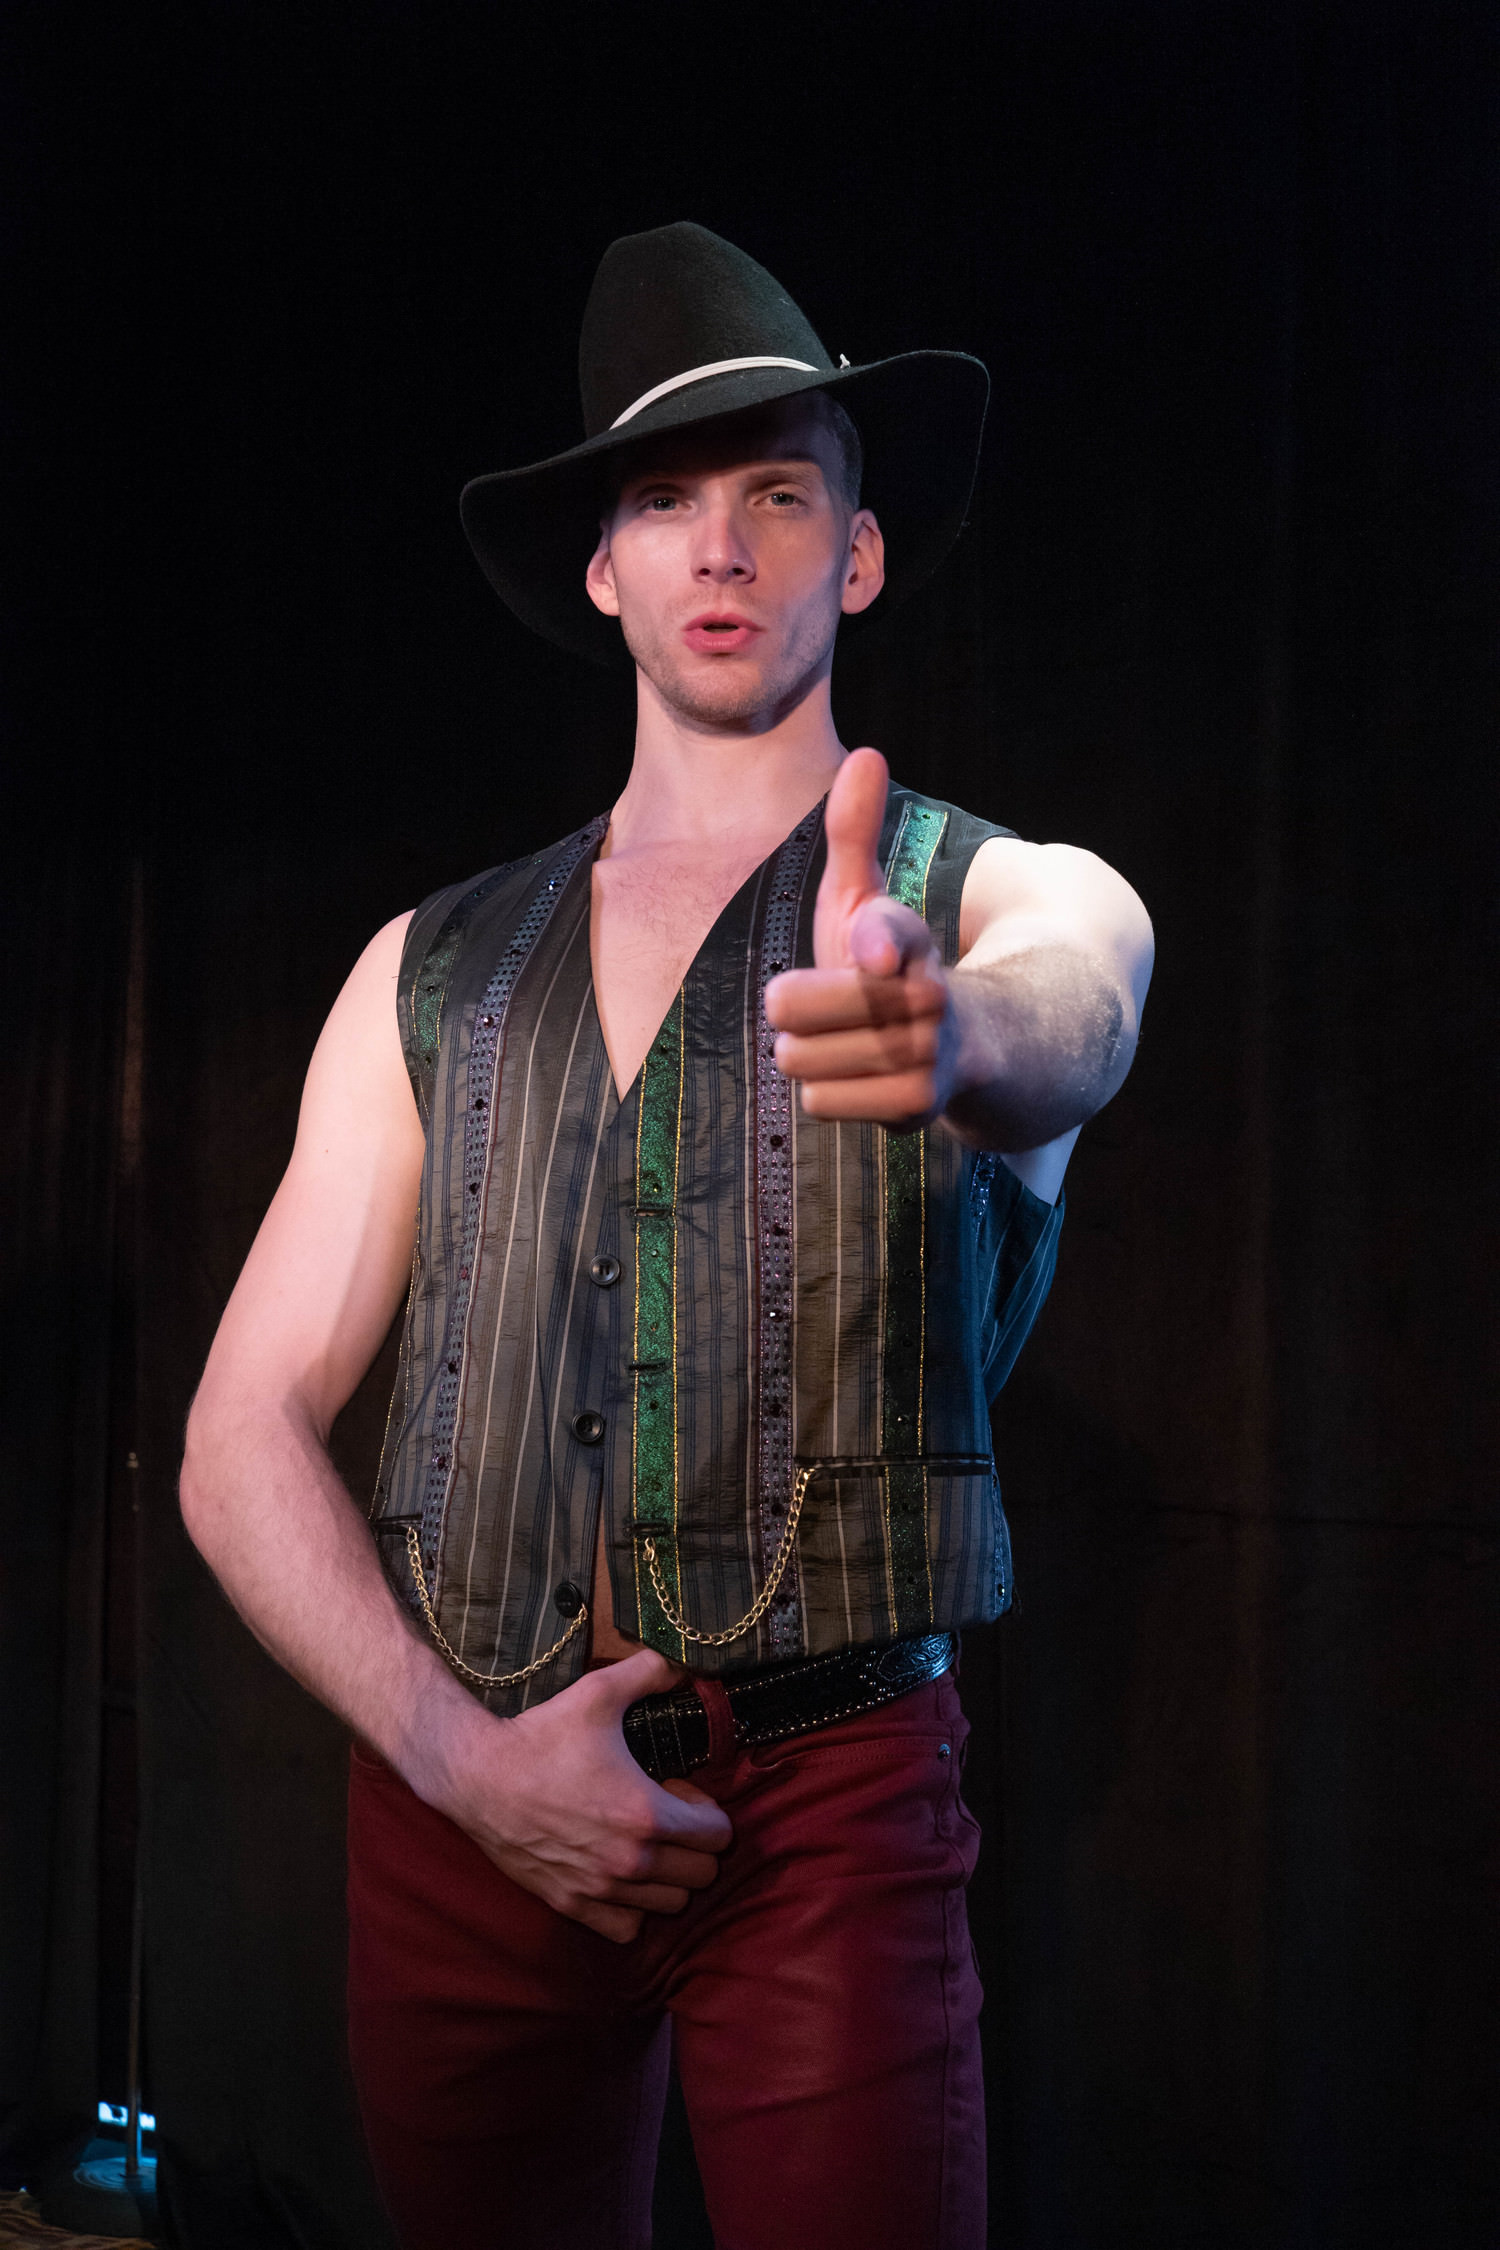 Shown: Christopher M Howard Photo by: Richard Lovrich